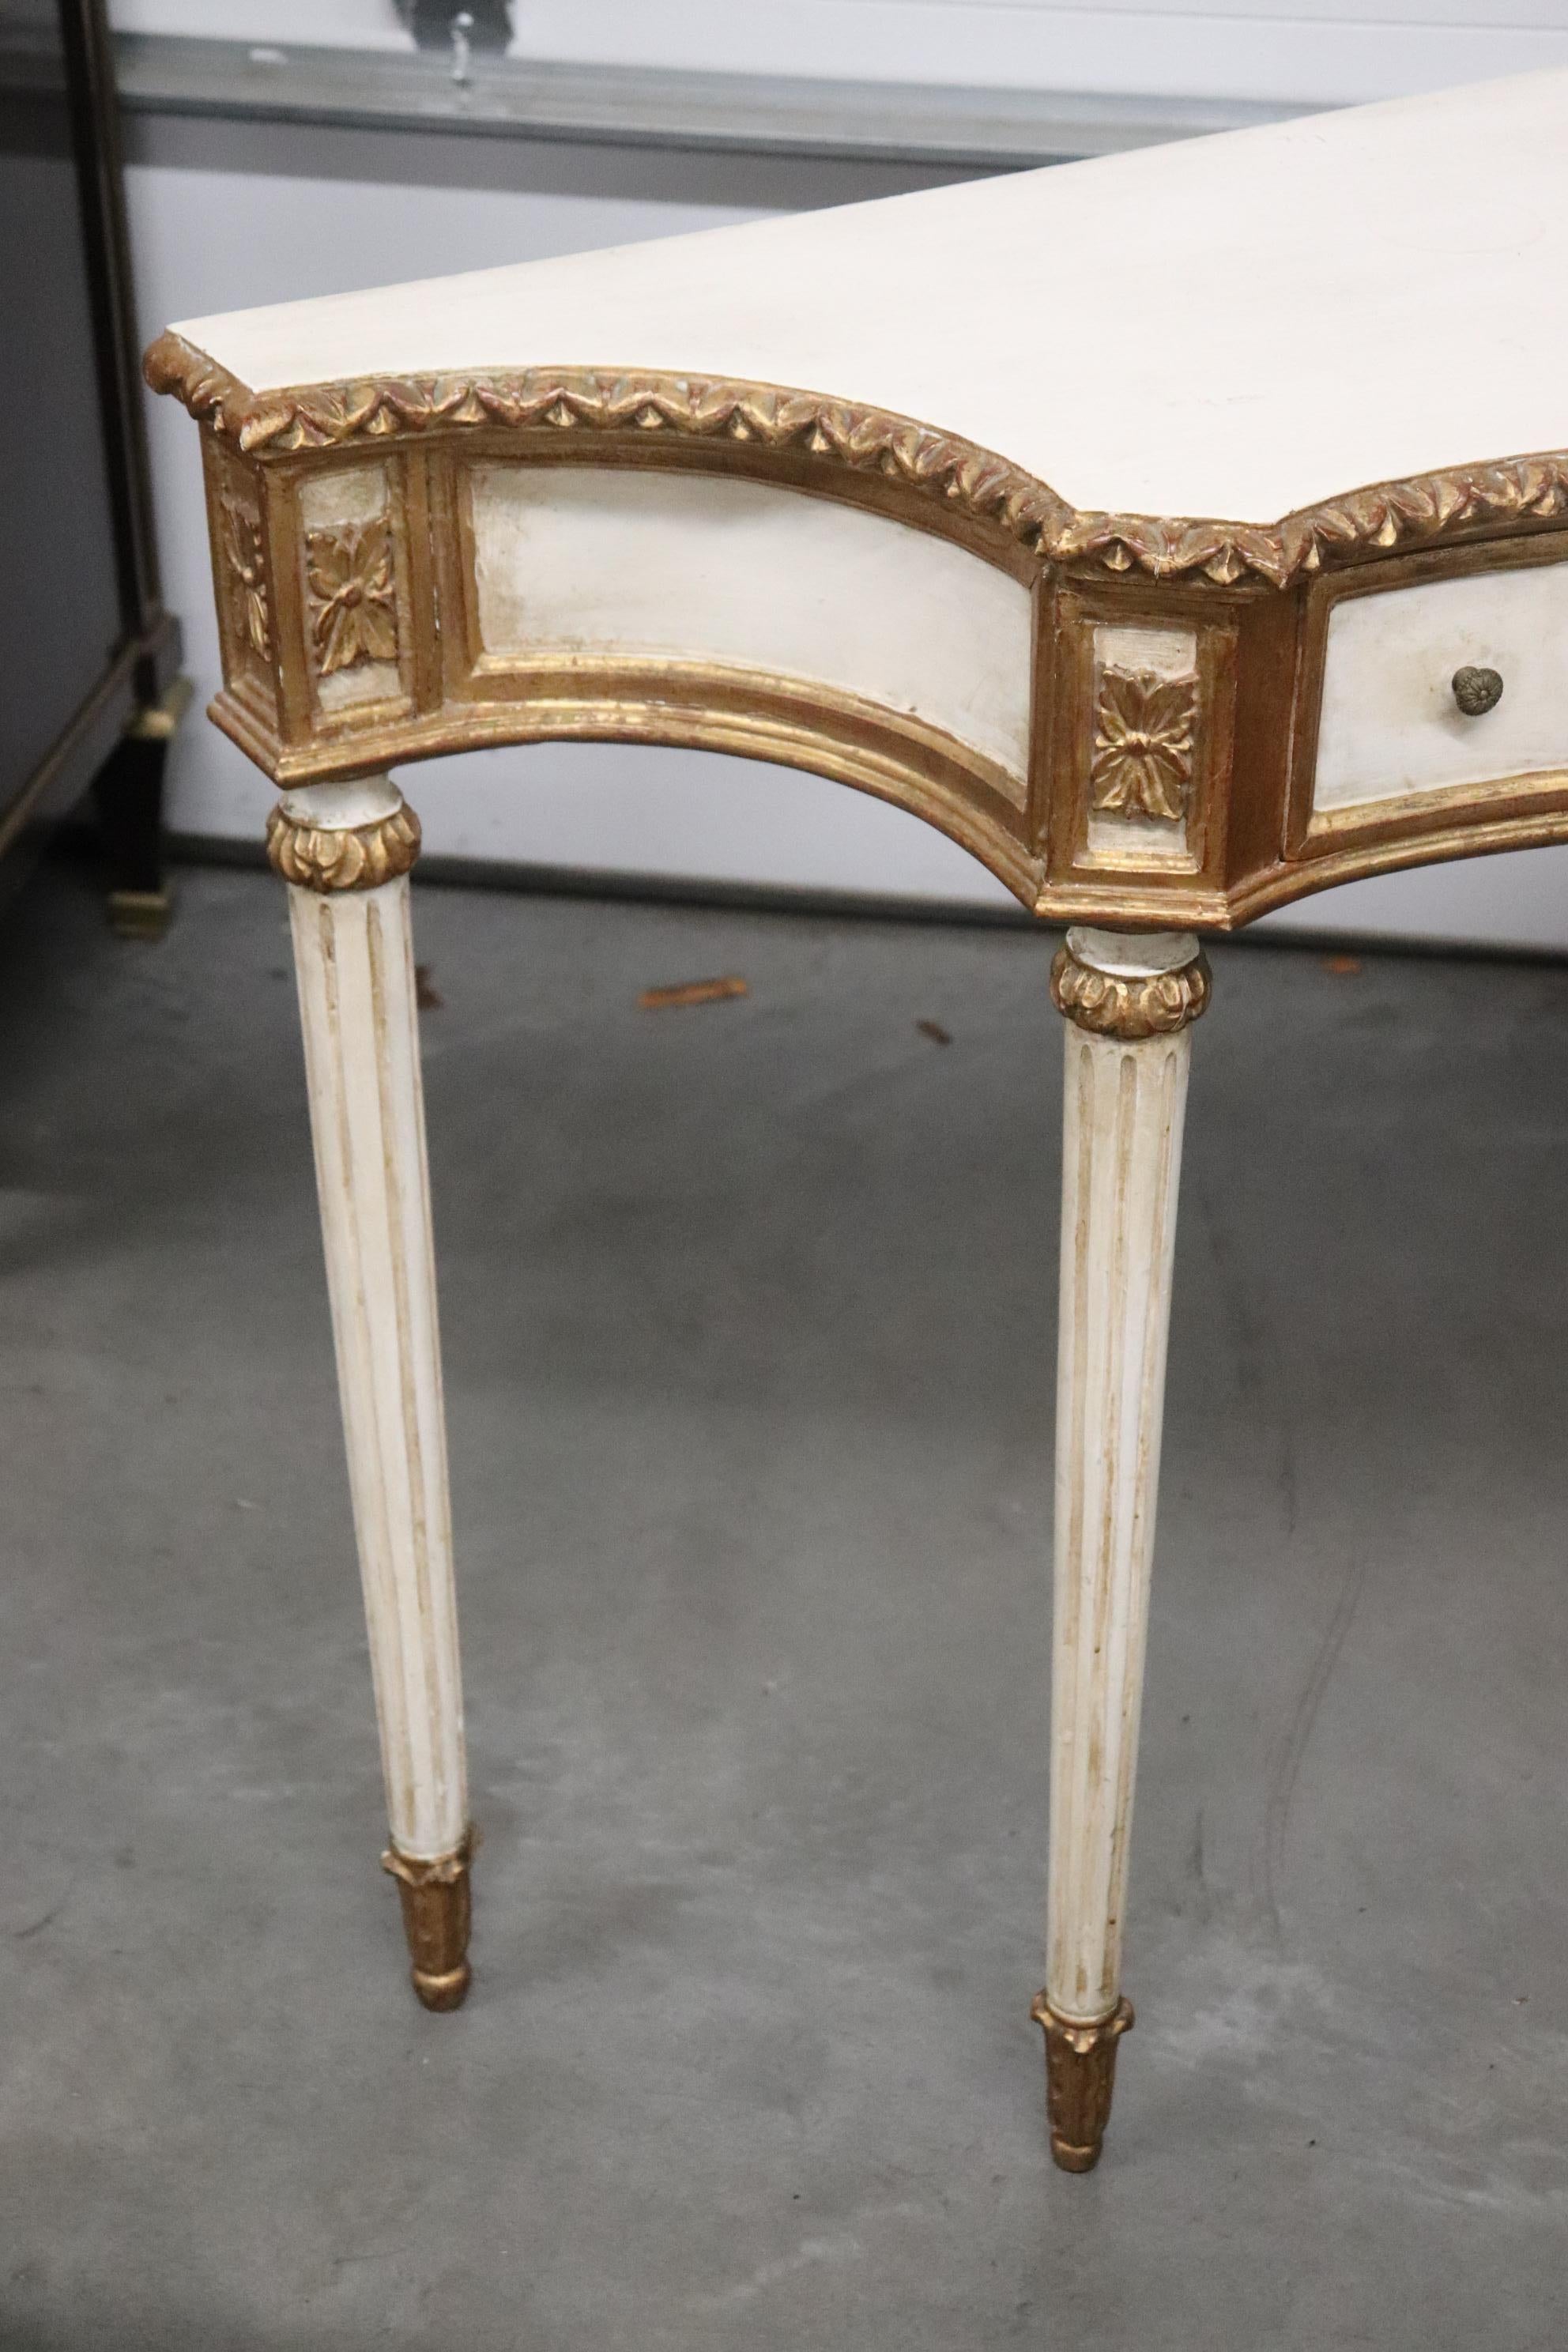 Antique White Painted and Gilded Florentine Italian Console Table, circa 1940s For Sale 2